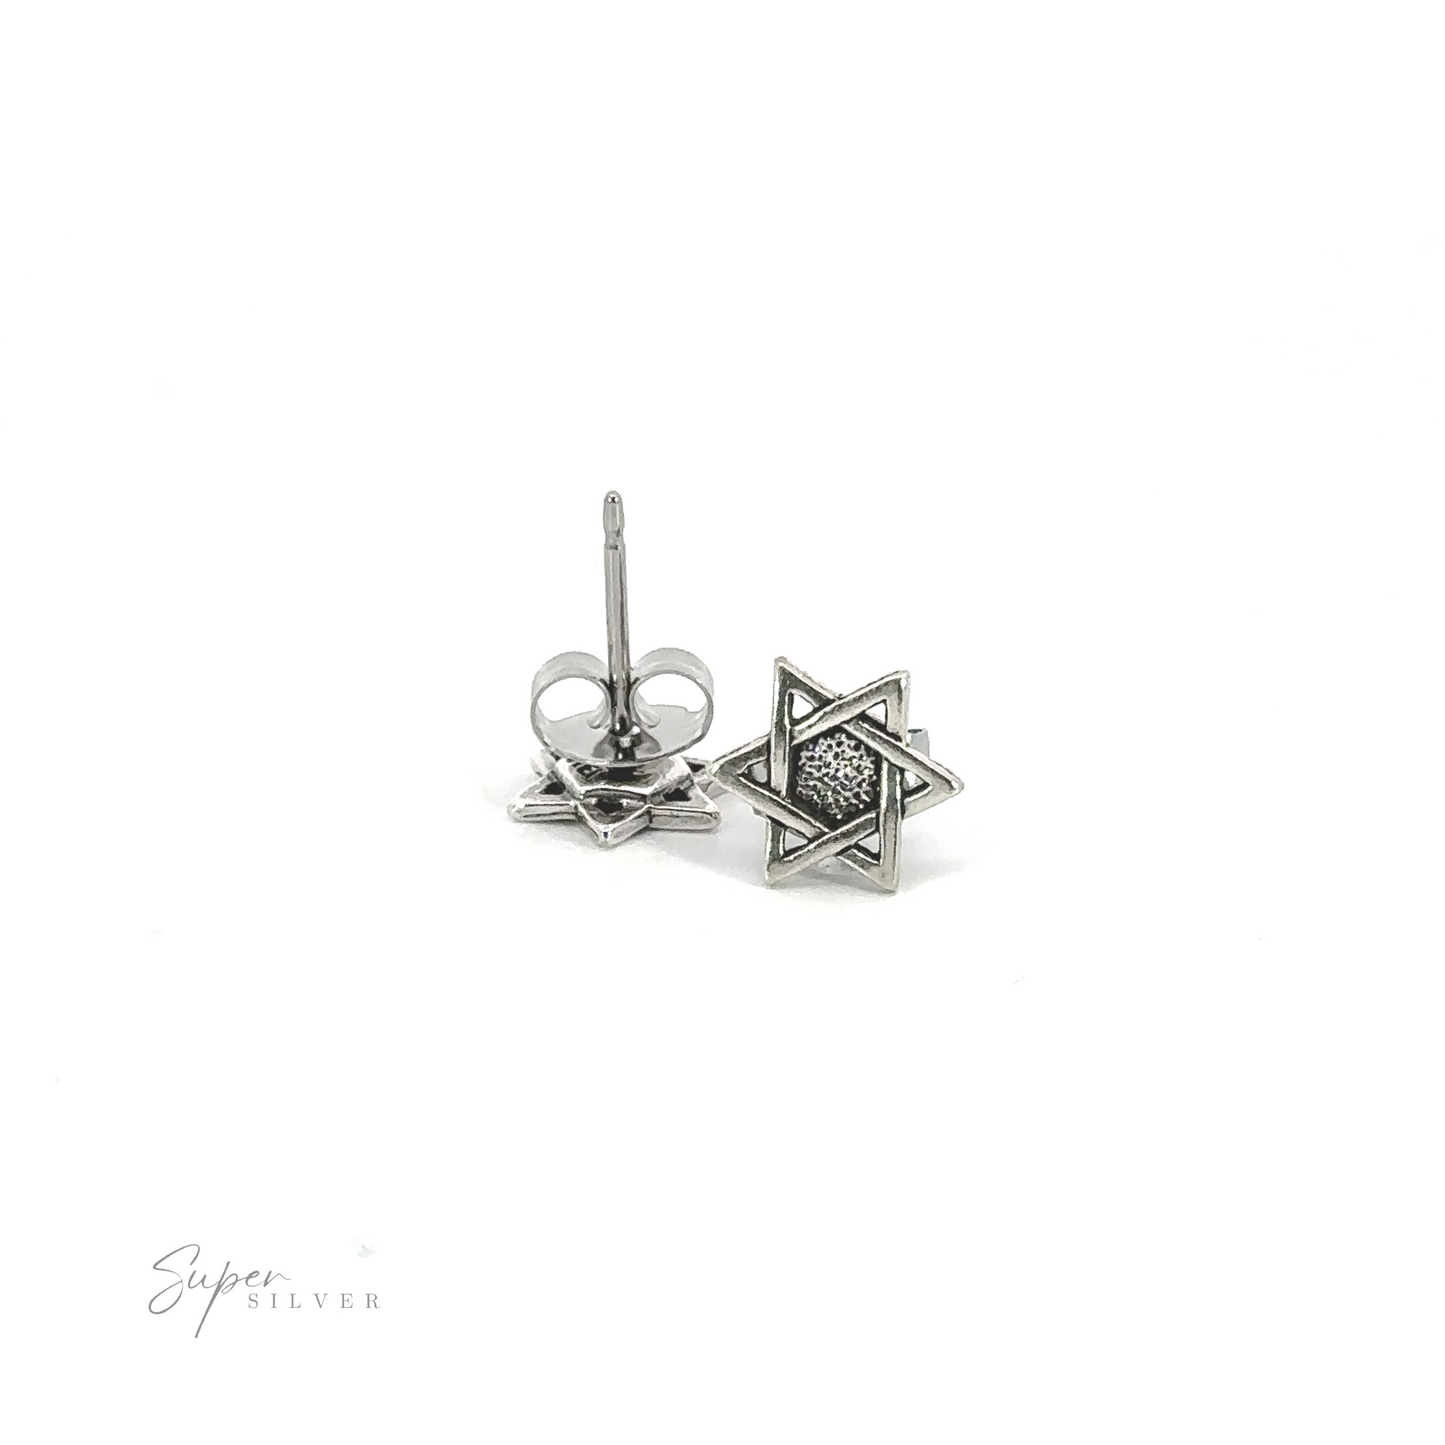 A sparkling pair of sterling silver Star of David studs.